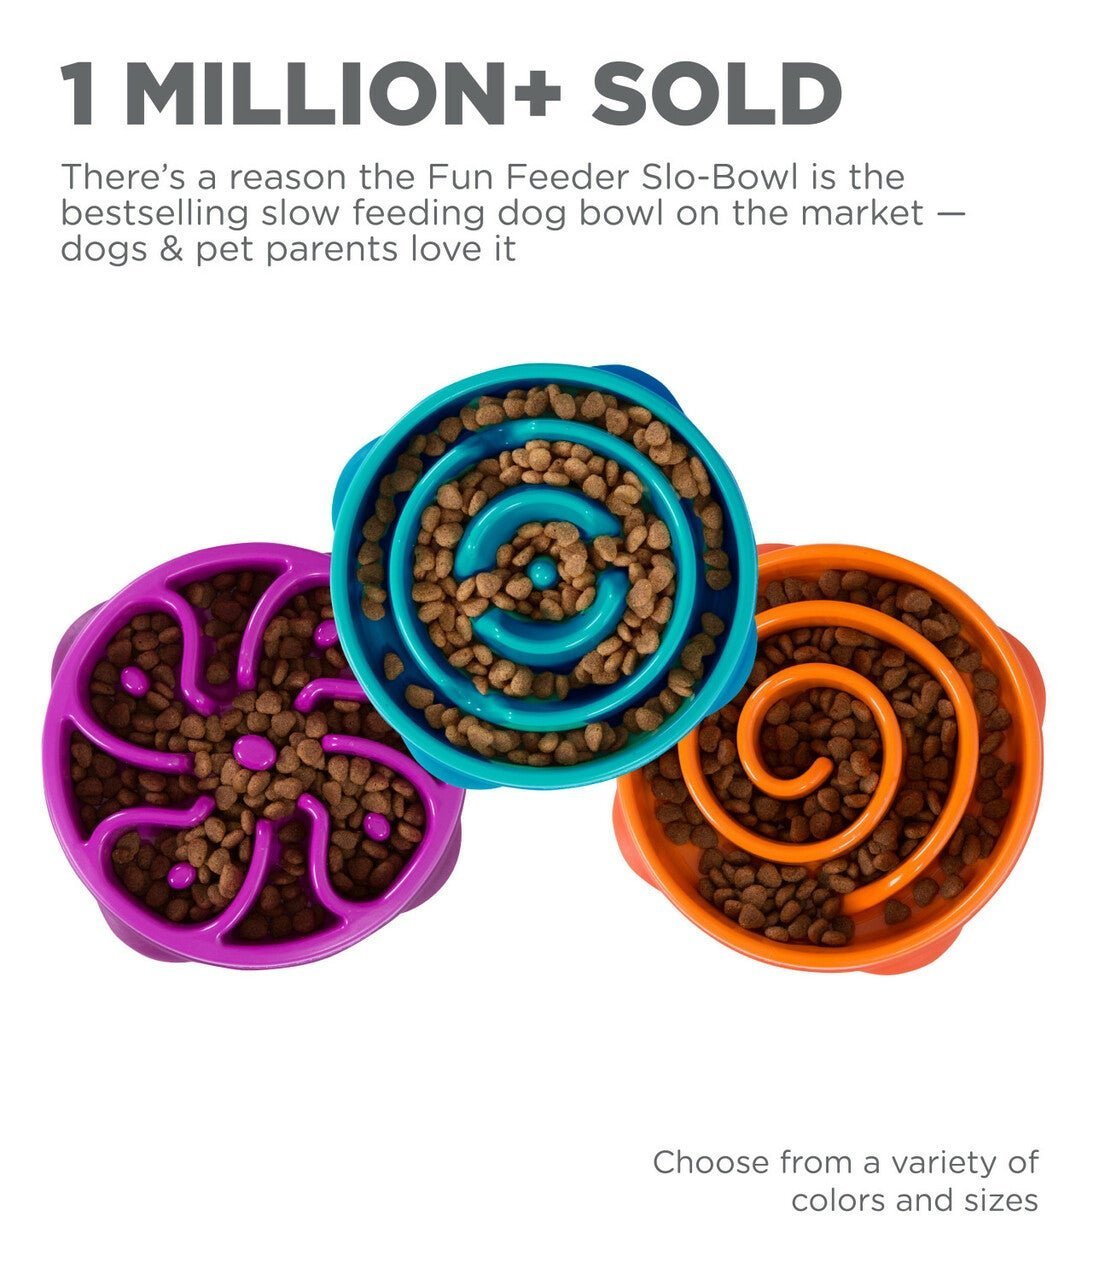 A purple, teal and orange round slow feeder dog bowl with food in the slow feeder